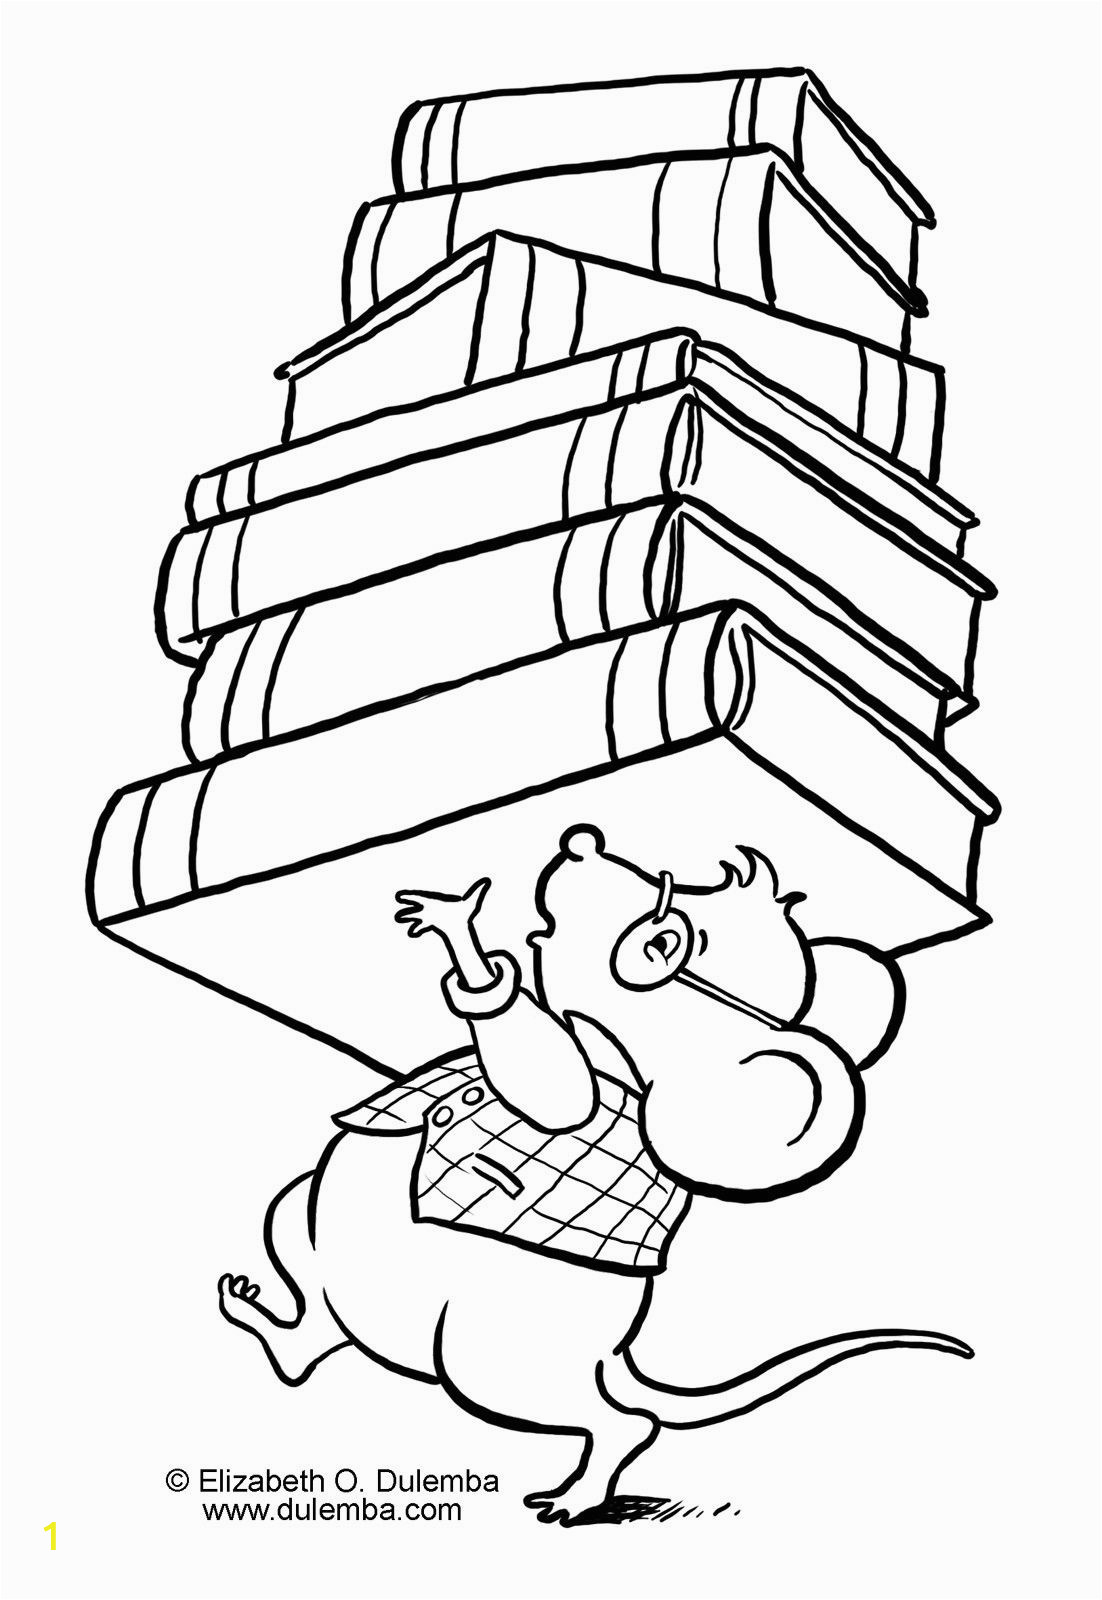 Household Items Coloring Pages Library Coloring Pages for Kids